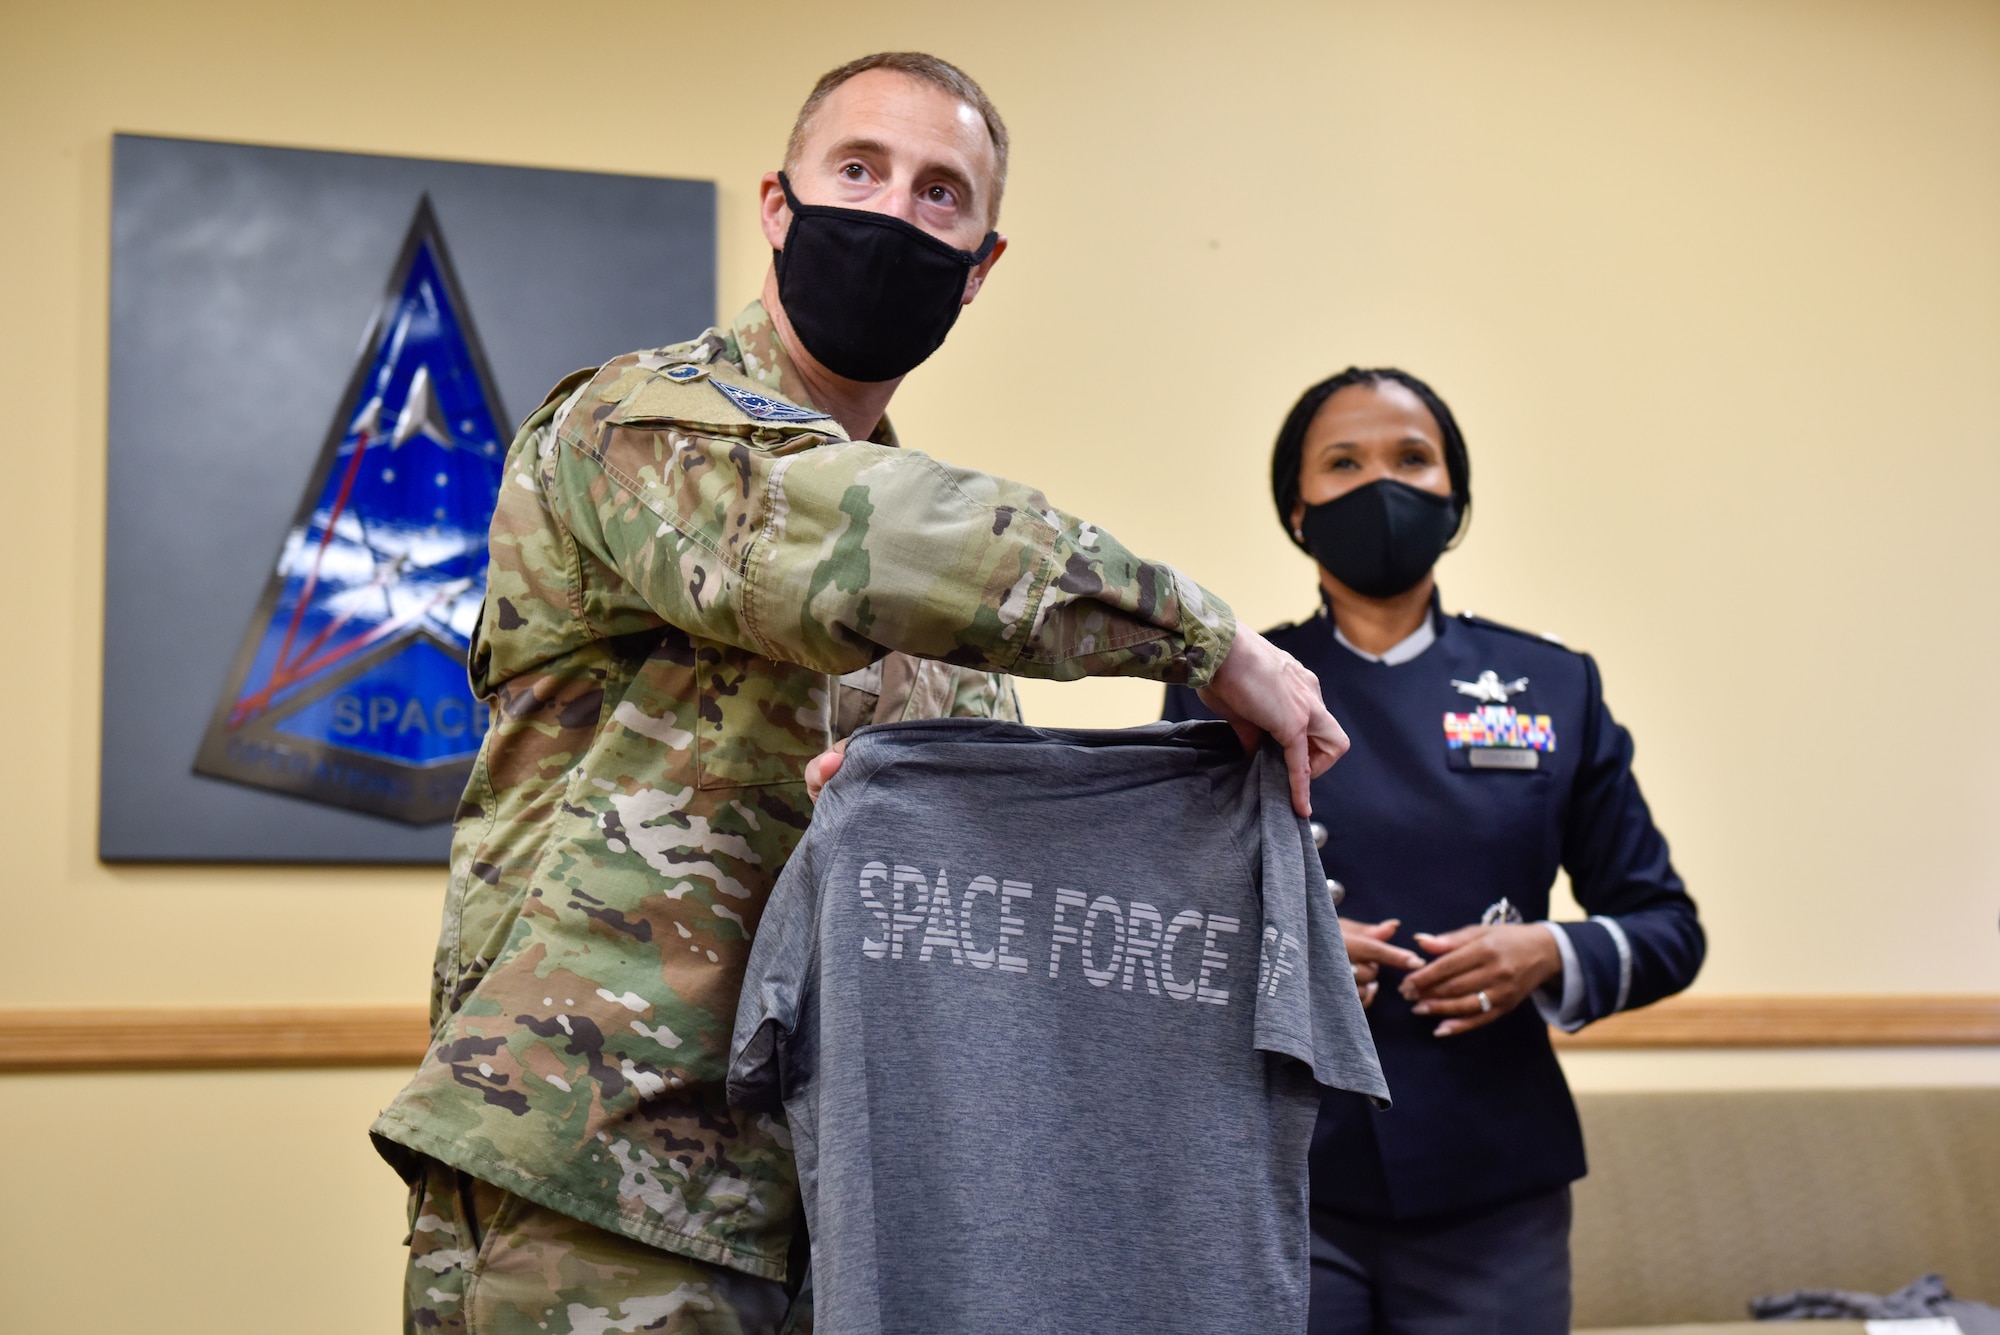 U.S. Space Force Col. Matthew Cantore and Lt. Col. Alison Gonzalez, both from the Office of the Chief of Space Operations, reveal a prototype of the new USSF physical training uniform to members of Space Delta 4's geographically-separated units over Zoom on Buckley Space Force Base, Colo., Oct 20, 2021. The prototypes are being shown to Guardians around the force to ensure maximum satisfaction with the finished product. (U.S Space Force photo by Airman 1st Class Wyatt Stabler)